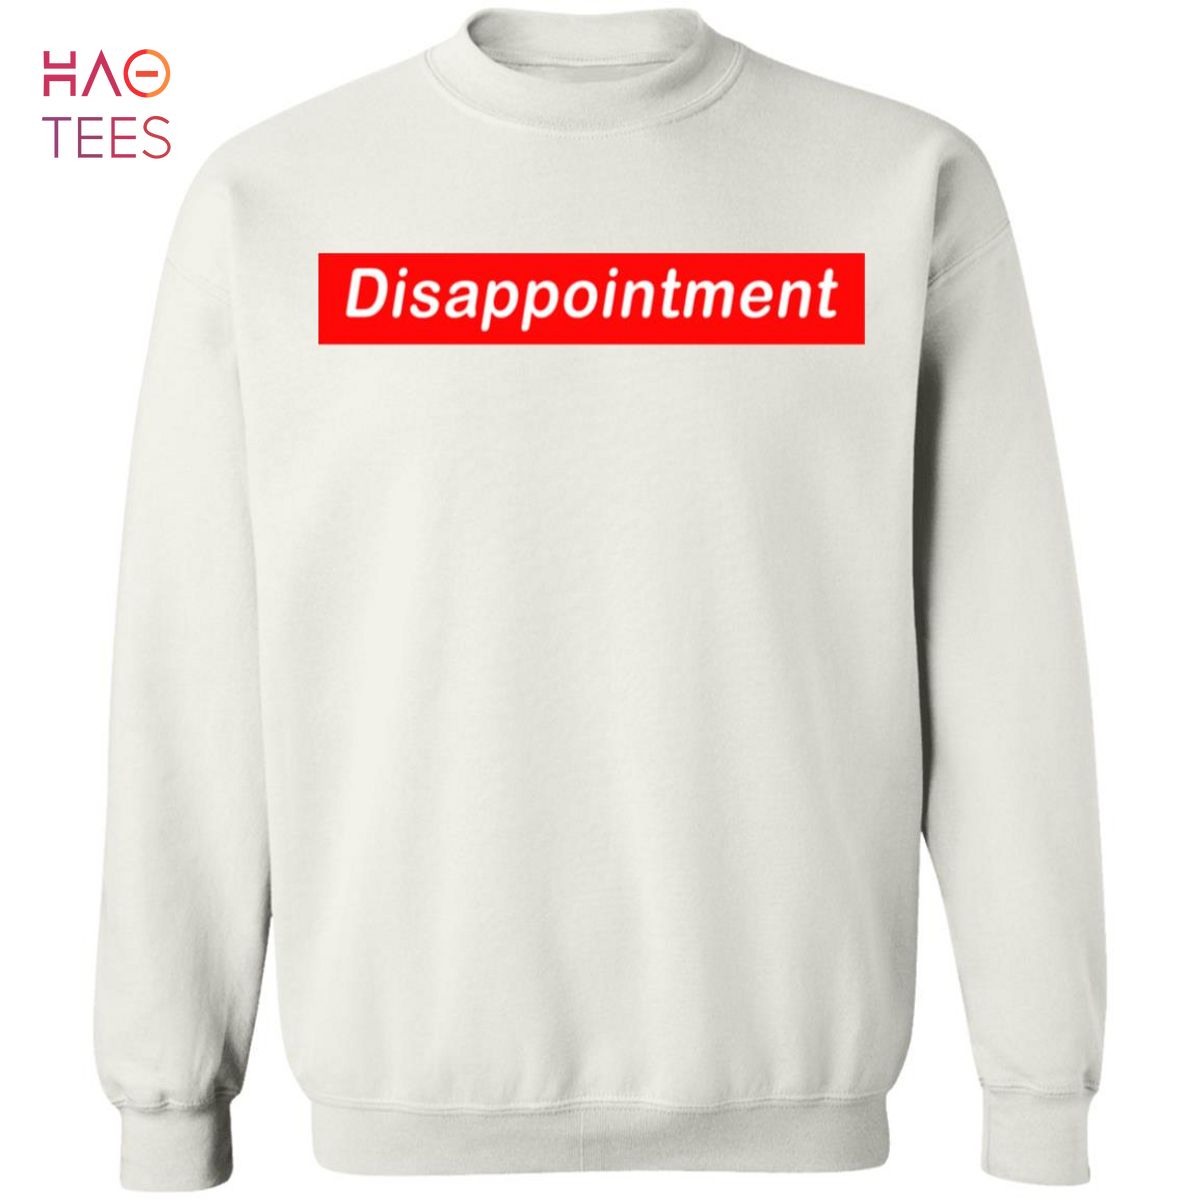 HOT Disappointment Sweater